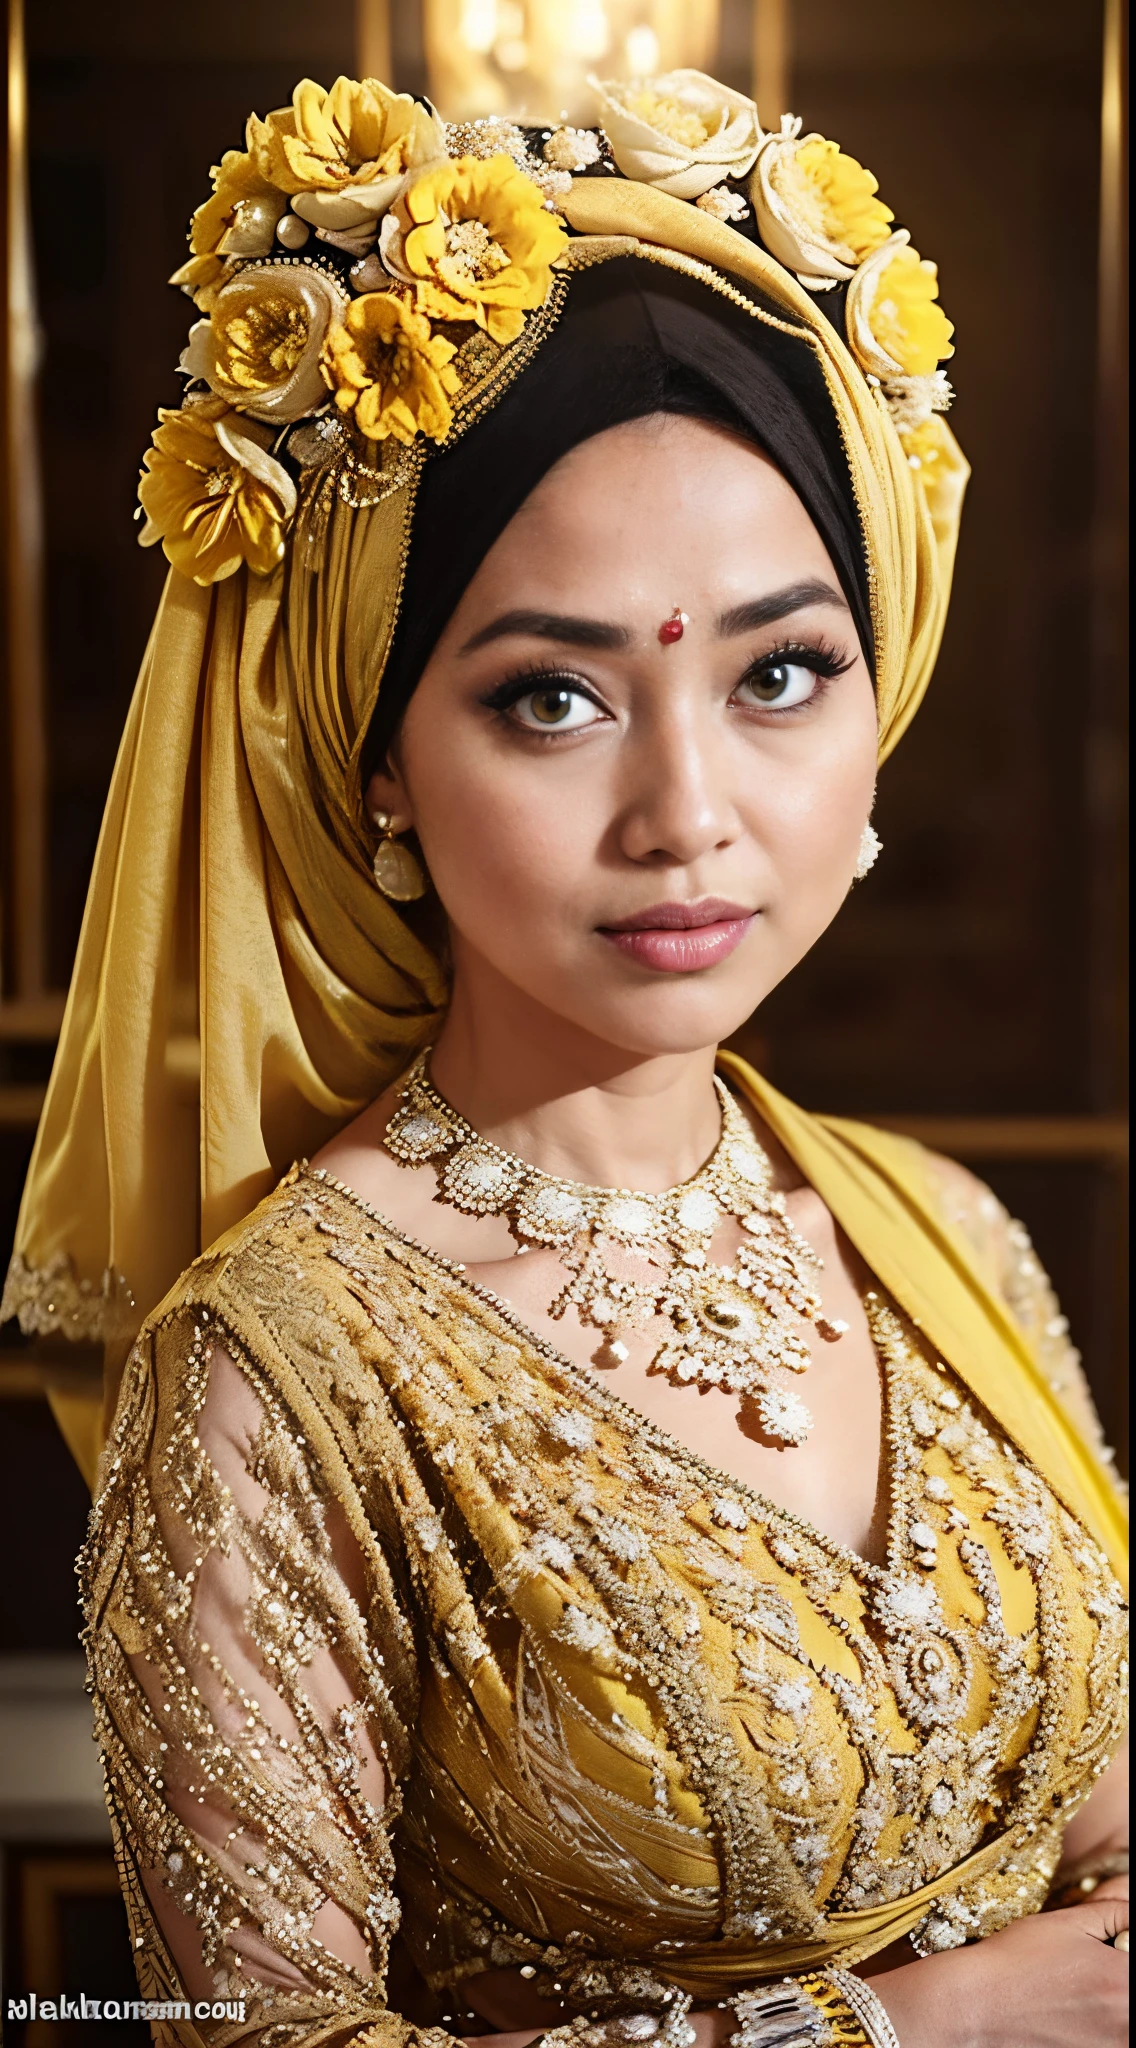 RAW, Best quality, high resolution, masterpiece: 1.3), beautiful Malay woman in hijab,Masterpiece, perfect fit body, thick thighs, (Huge breasts), big gorgeous eyes, Soft smile,((Close Up)),woman in a yellow top kebaya and black skirt standing on a sidewalk, yellow translucent lace, intricate clothing, intricate outfit, yellow ornate dress, with yellow cloths, elegant yellow skin, very beautiful enga style, traditional beauty, intricate clothes, yellow and black, yellow clothes, (((yellow))), wearing an ornate outfit, lace, traditional clothes, yellow, black and yellow, Delicate turtleneck, necklace, shairband, afternoon walk, City garden, Excellent lighting, Bright colors, Clean lines